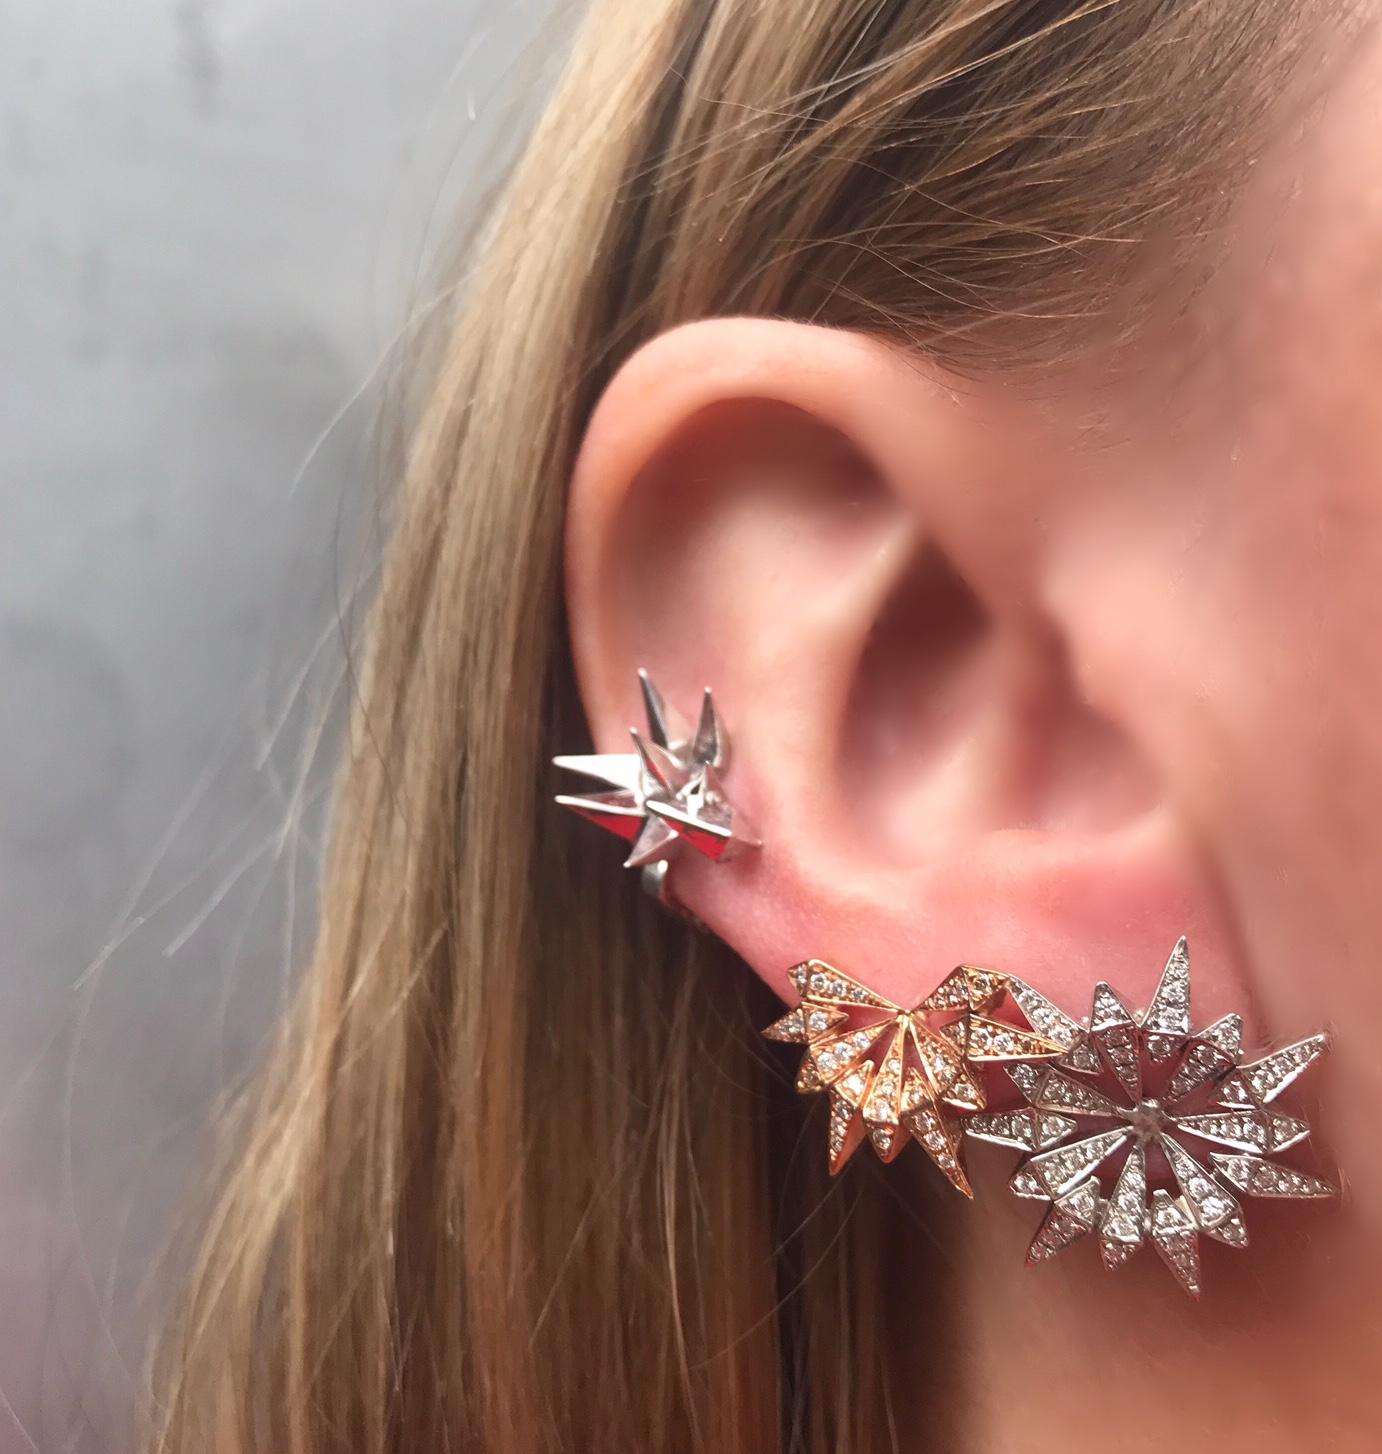 Diamond Sunburst Studs feature two spike edge white diamond sun ray studs set in 18k Yellow Gold
Includes 18k Yellow Gold push closure earring backings 
18k Yellow Gold, White Diamonds
Sold as a Pair
From Karma El Khalil's Echo Collection